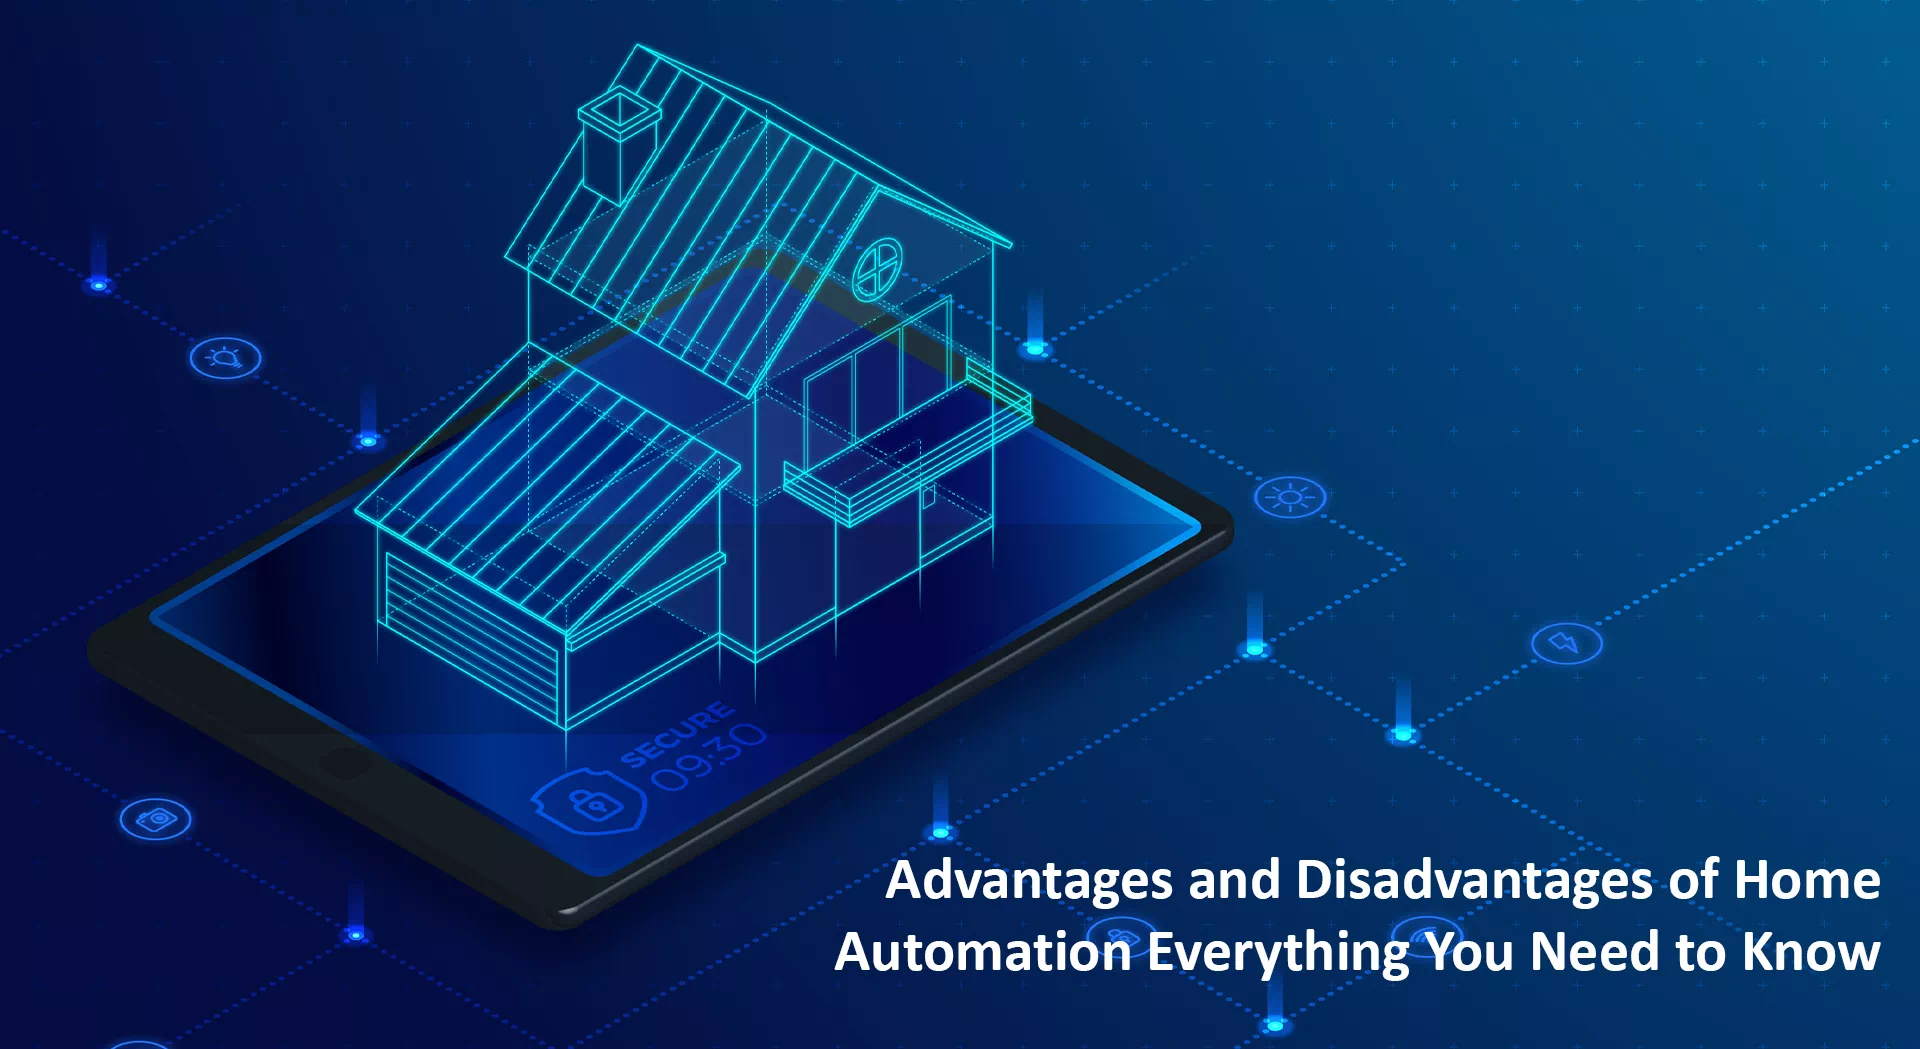 Advantages and Disadvantages of Home Automation Everything You Need to Know